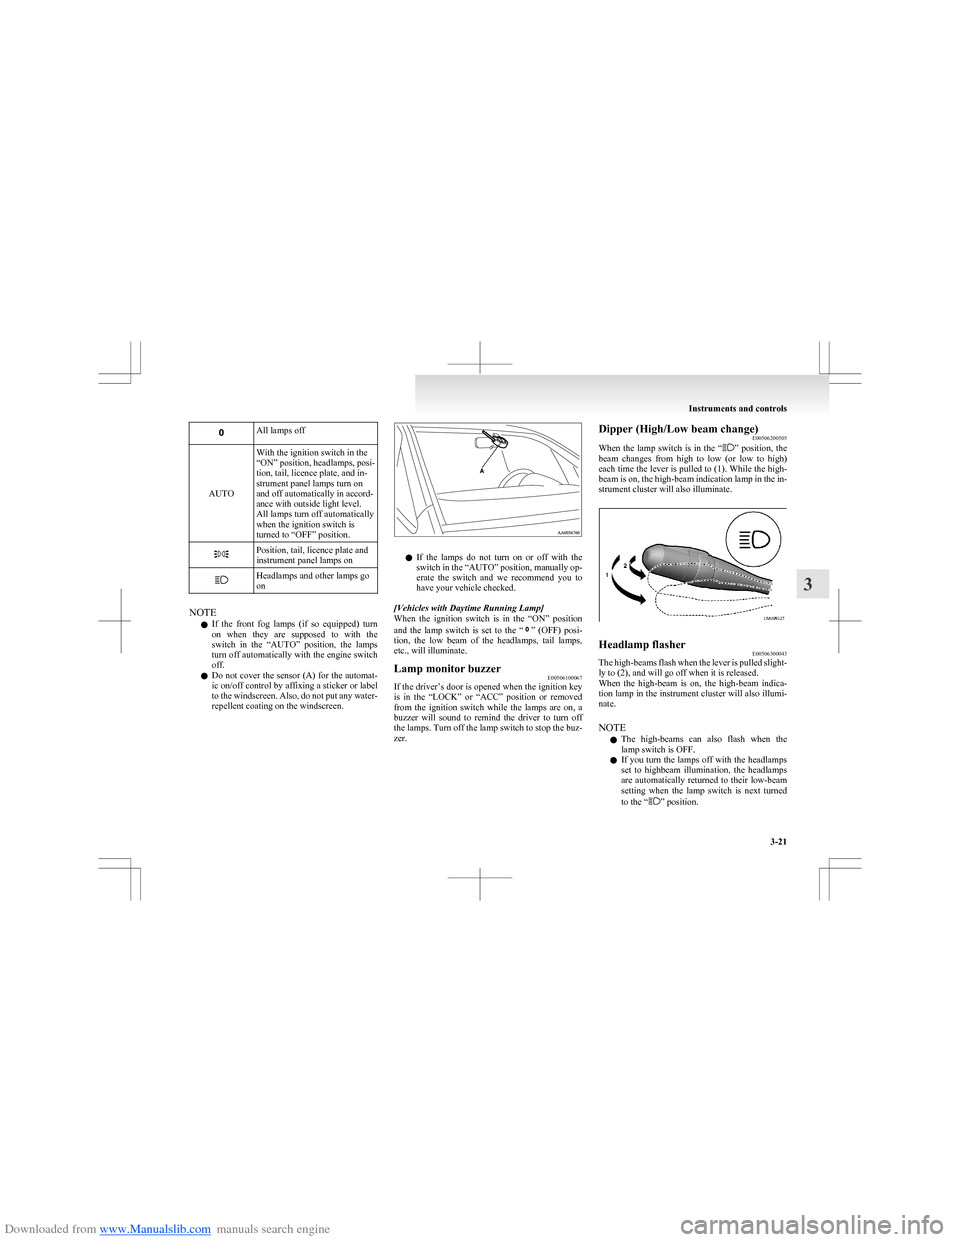 MITSUBISHI COLT 2009 10.G User Guide Downloaded from www.Manualslib.com manuals search engine All lamps off
AUTO
With the ignition switch in the
“ON” position, headlamps, posi-
tion, tail, licence plate, and in-
strument panel lamps 